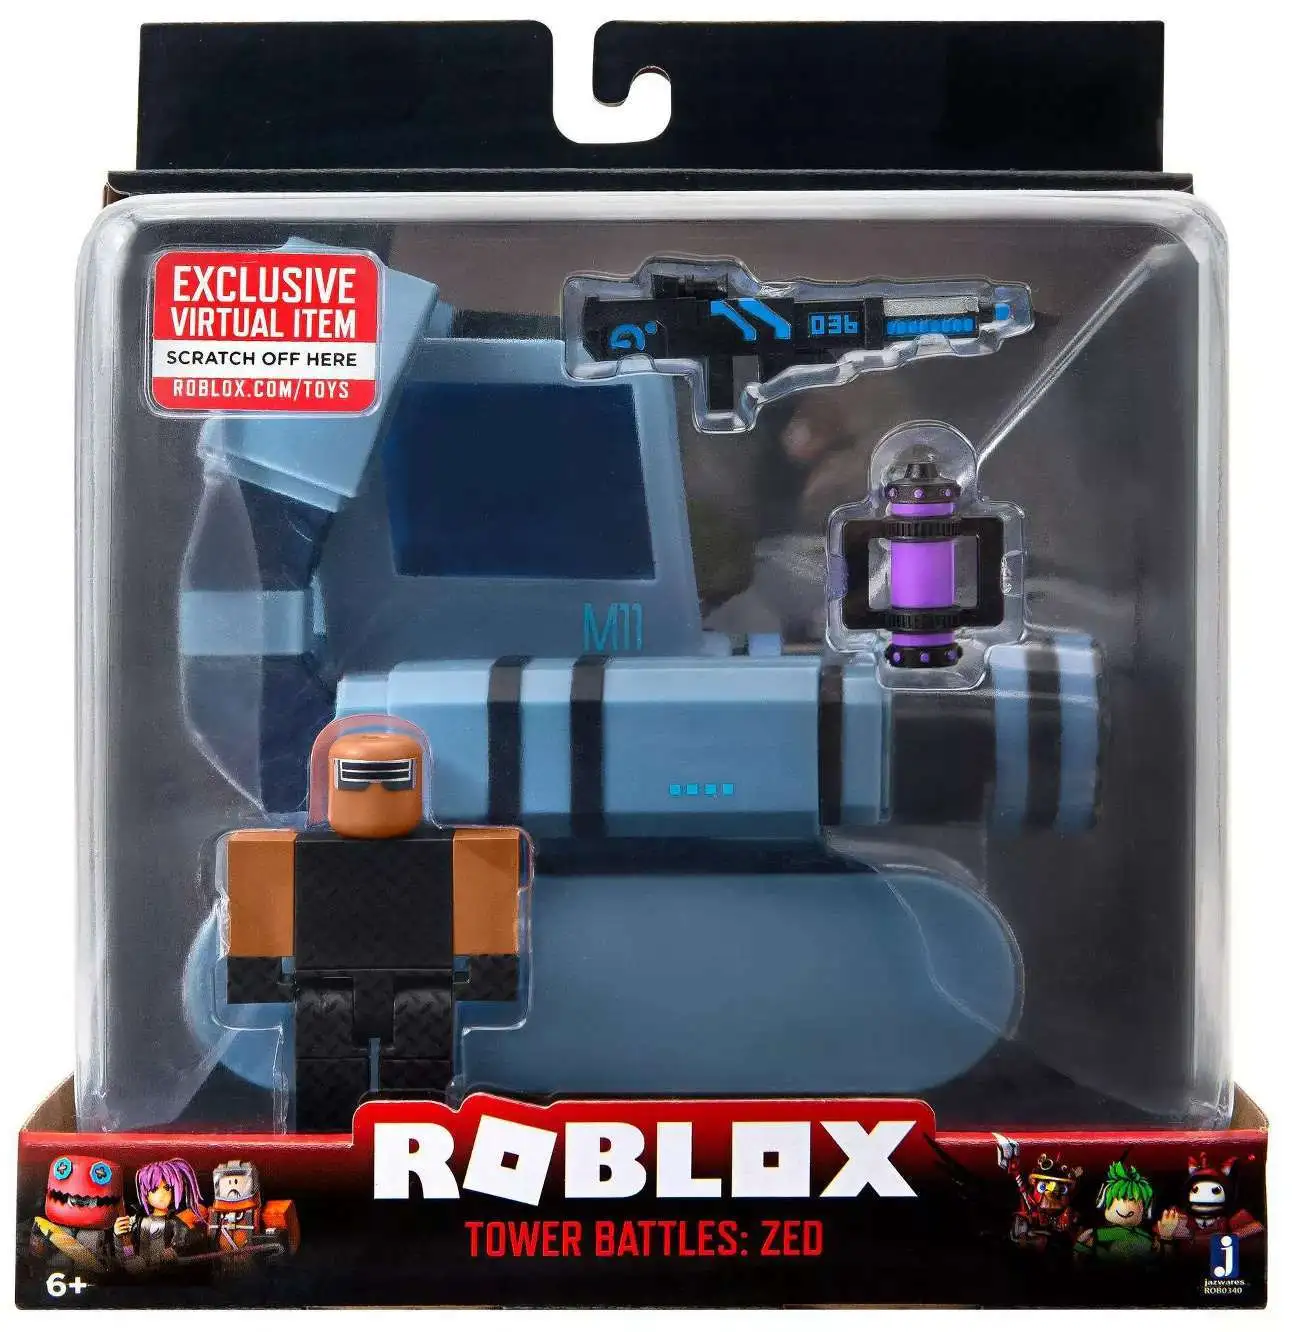  Roblox Action Collection - The Abominator Vehicle [Includes  Exclusive Virtual Item] : Toys & Games